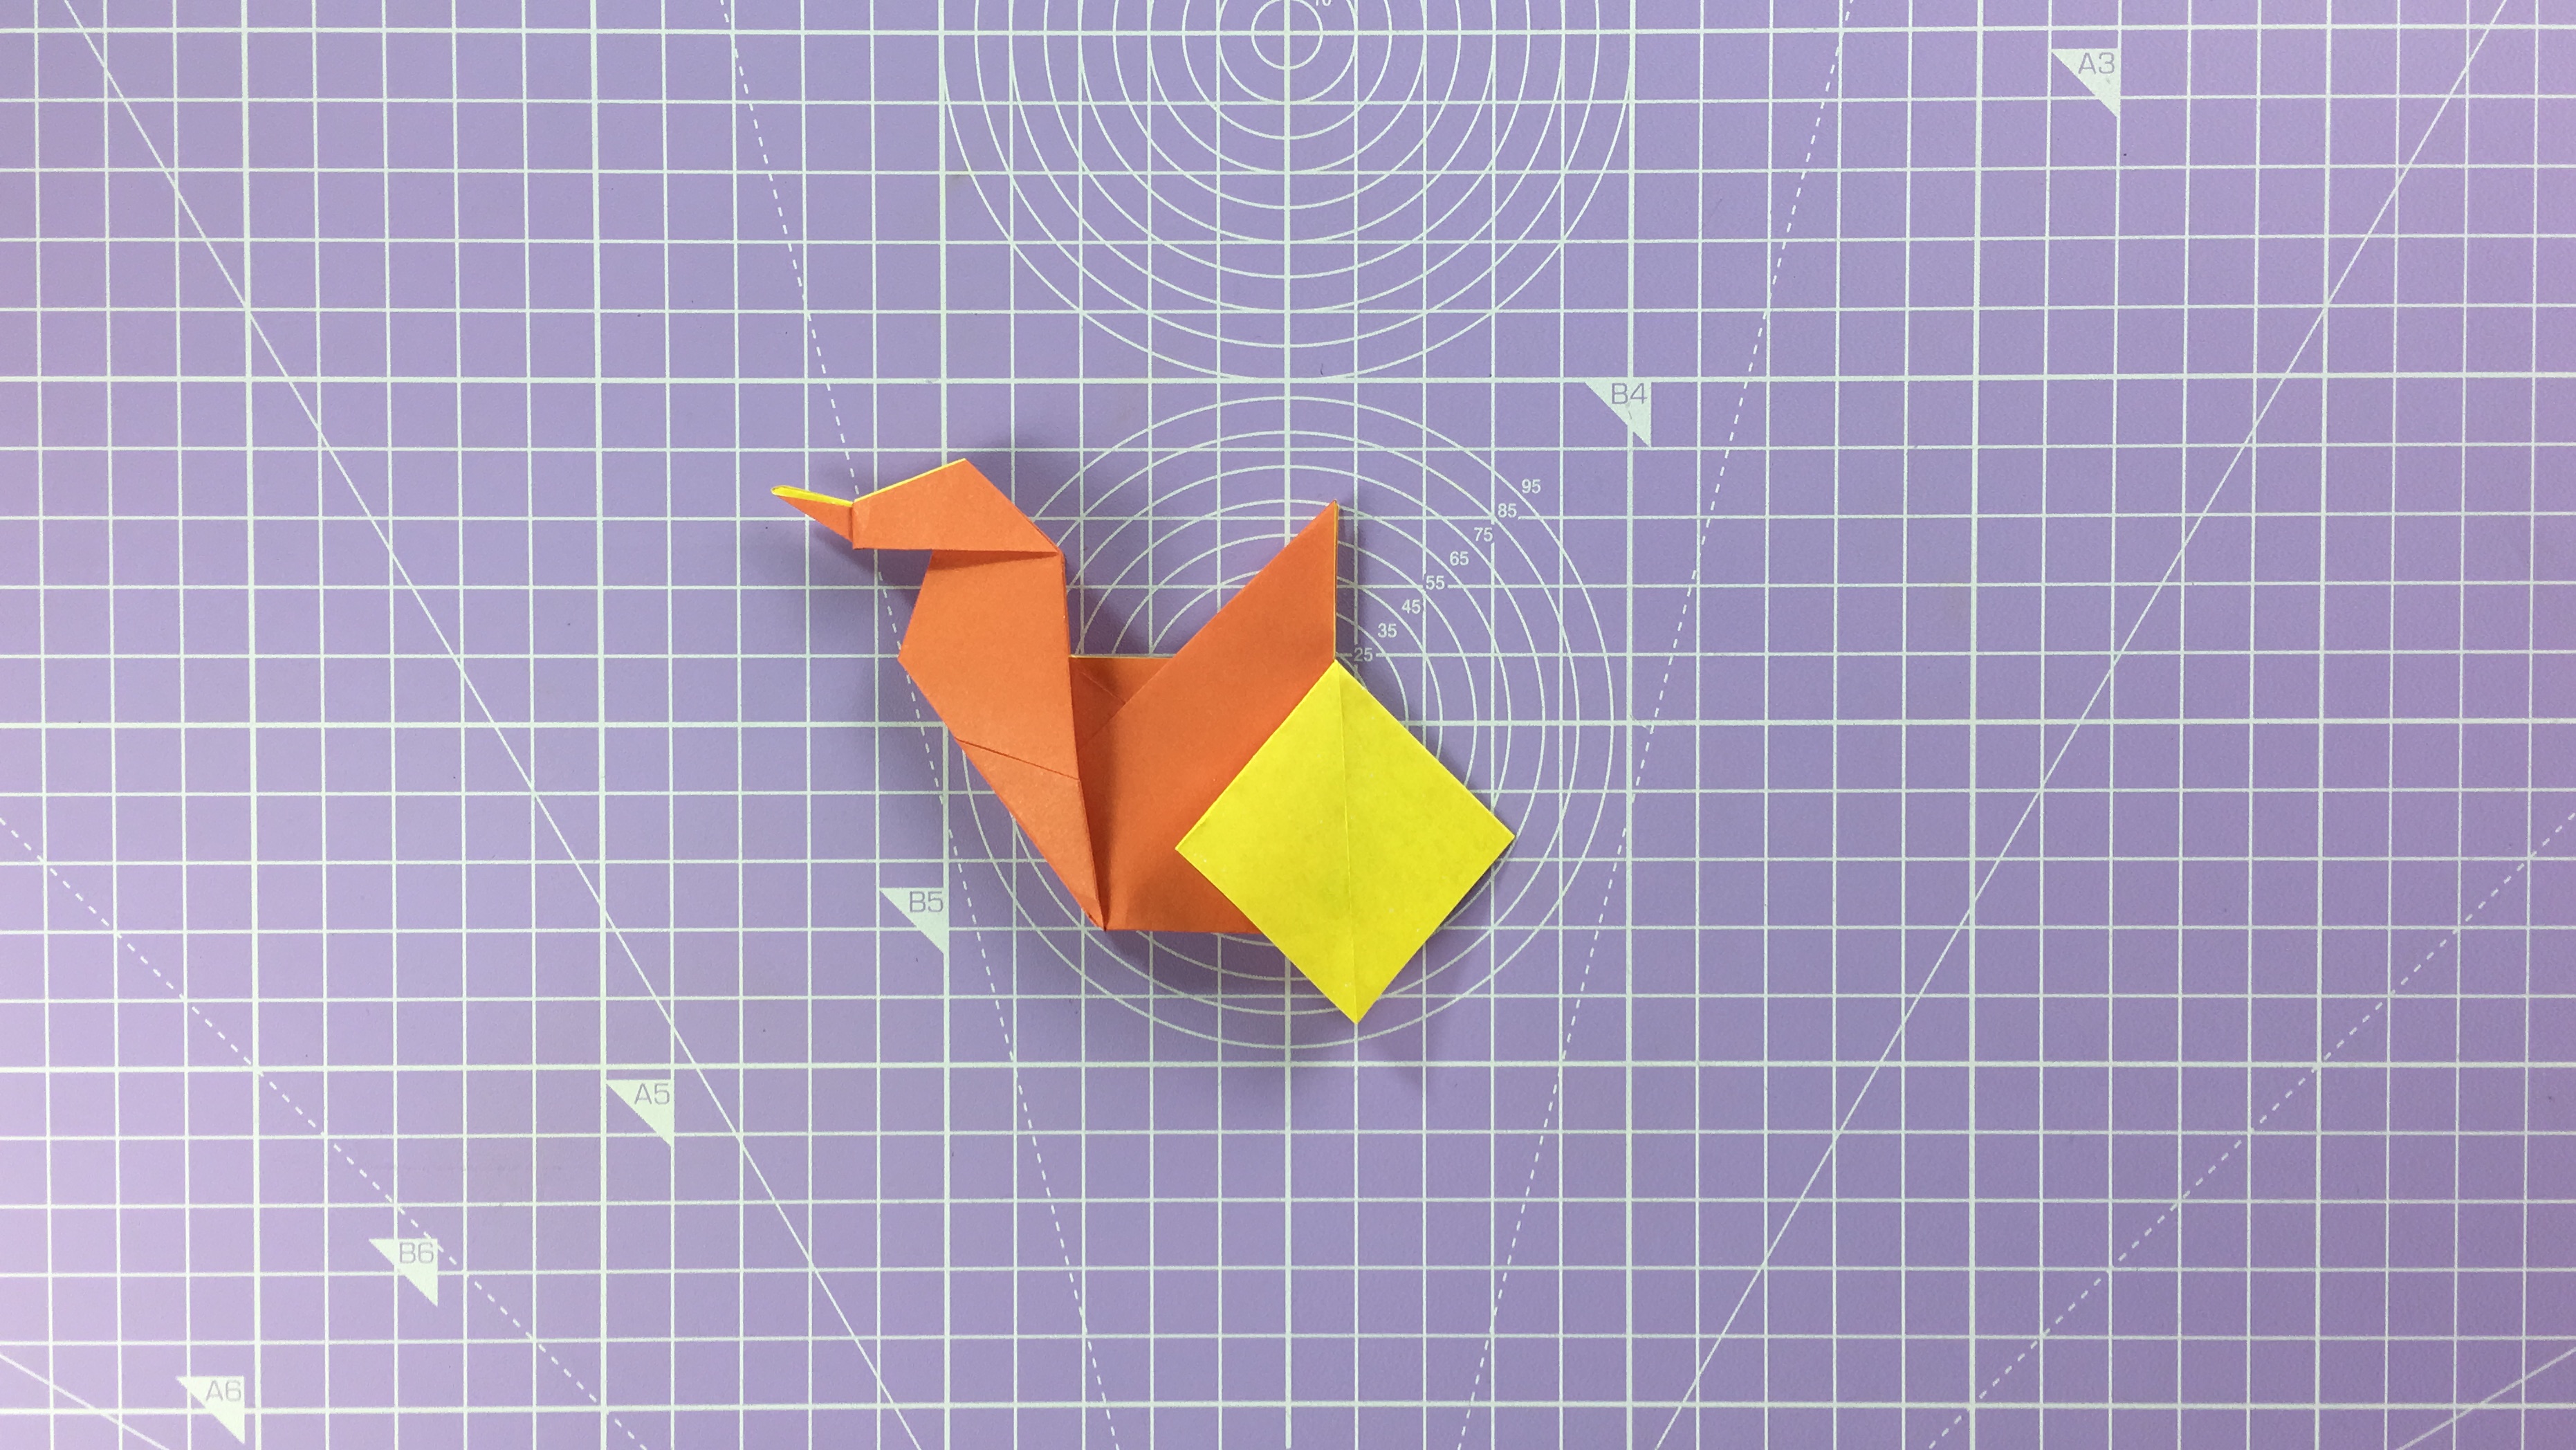 How to make an origami duck - step 17